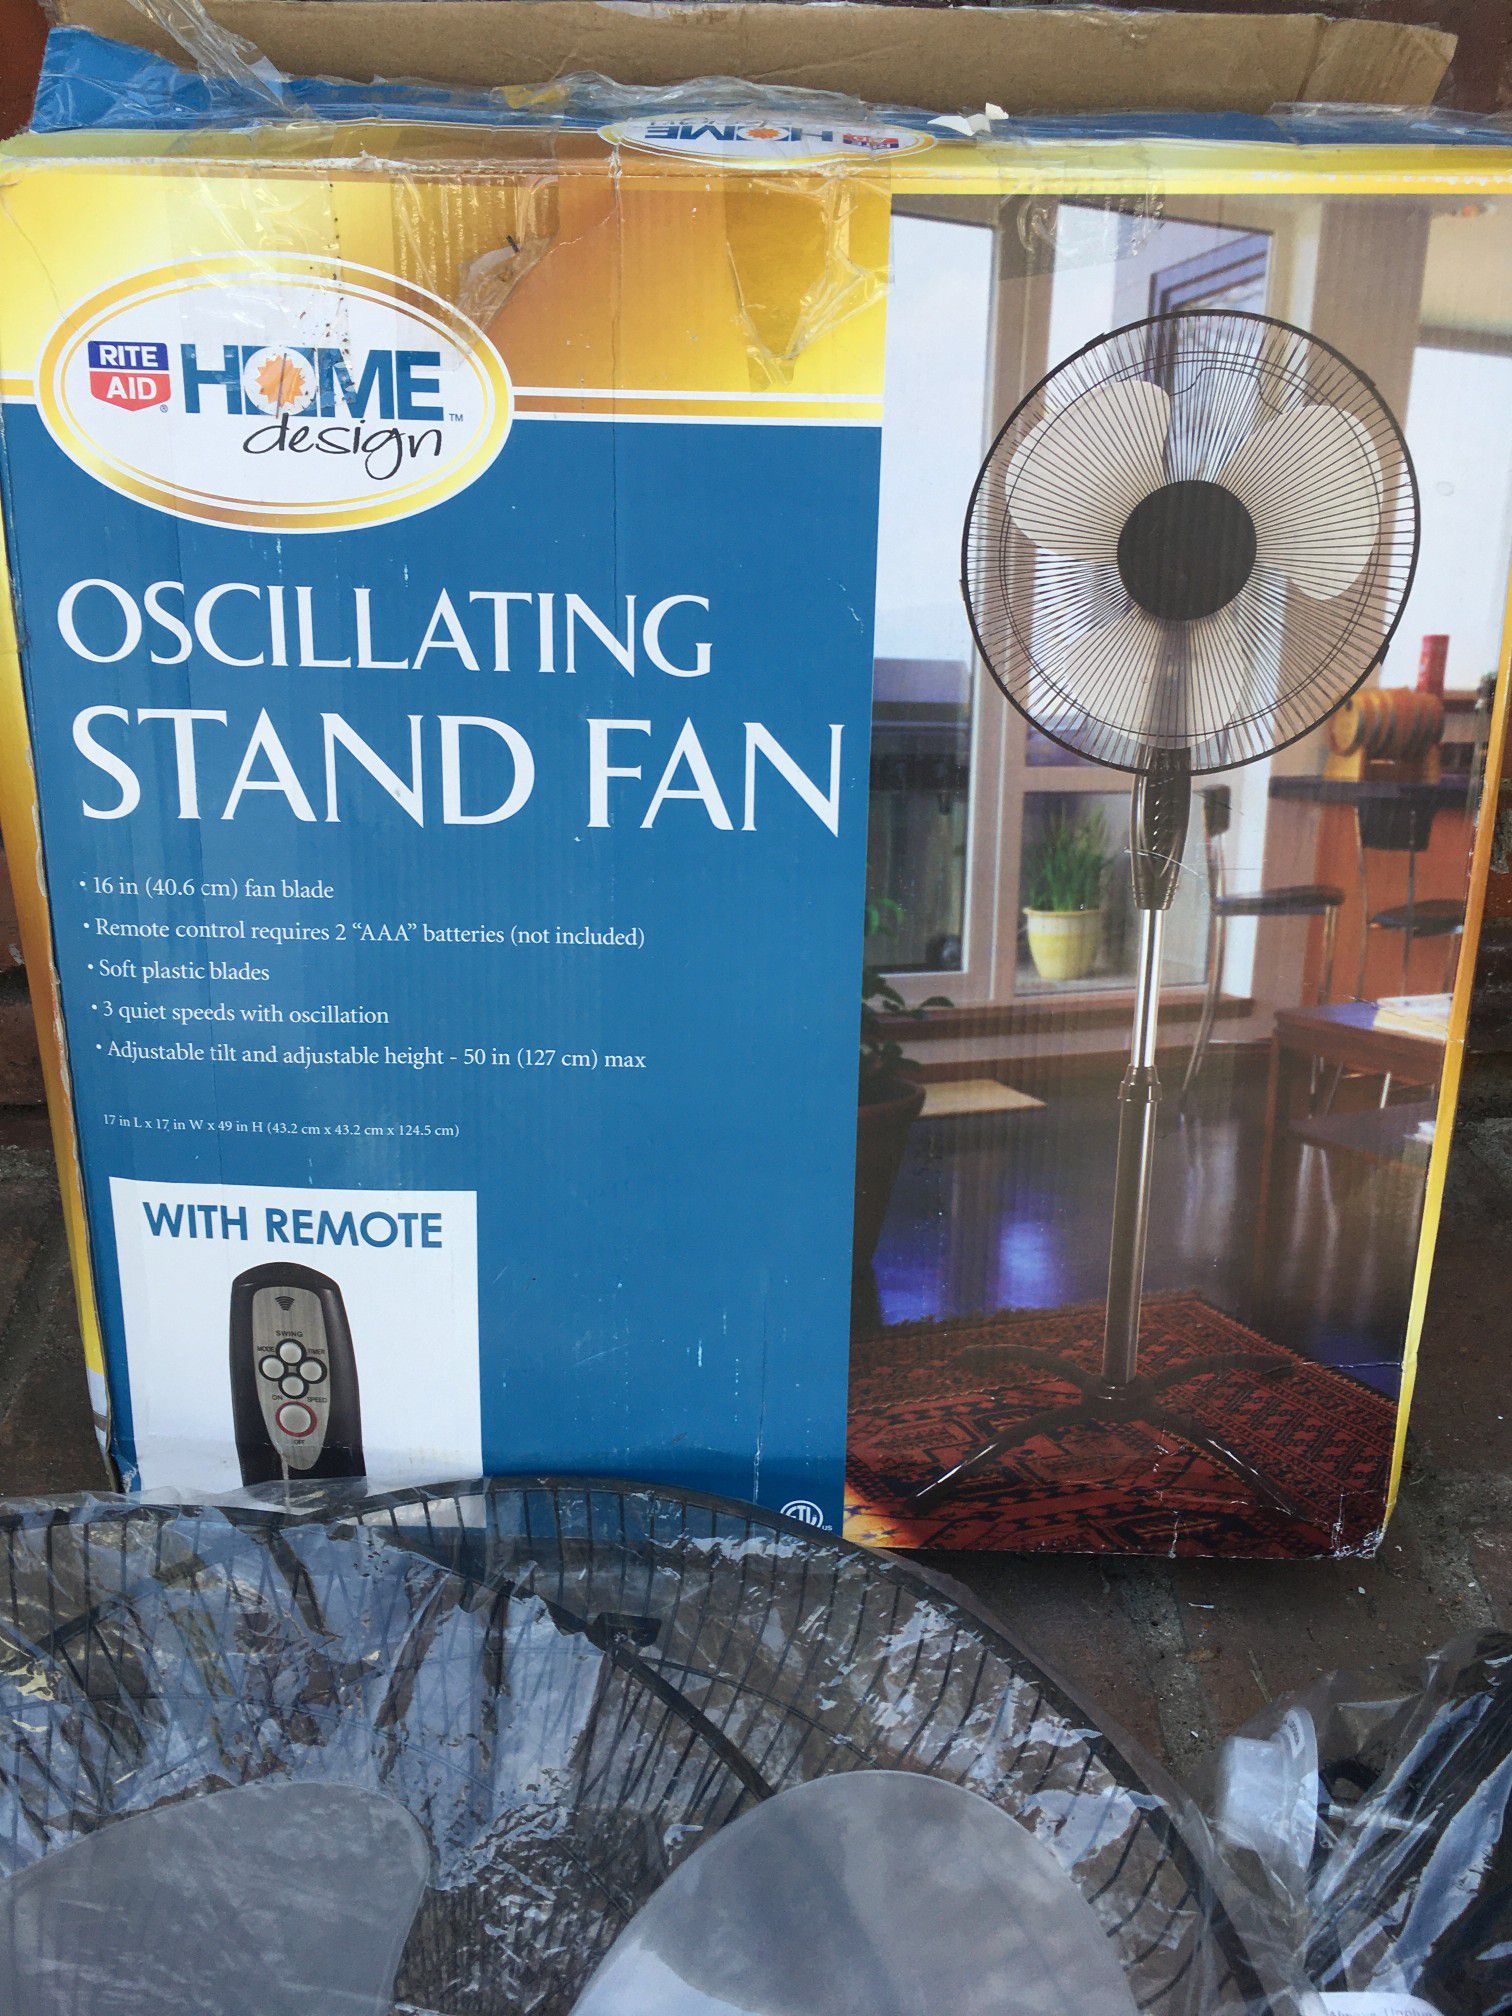 BRAND NEW IN BOX Rite Aid Home Design Oscillating Fan 3-Speed 16” Fan Blade WITH remote Adjustable Tilt and Height 30